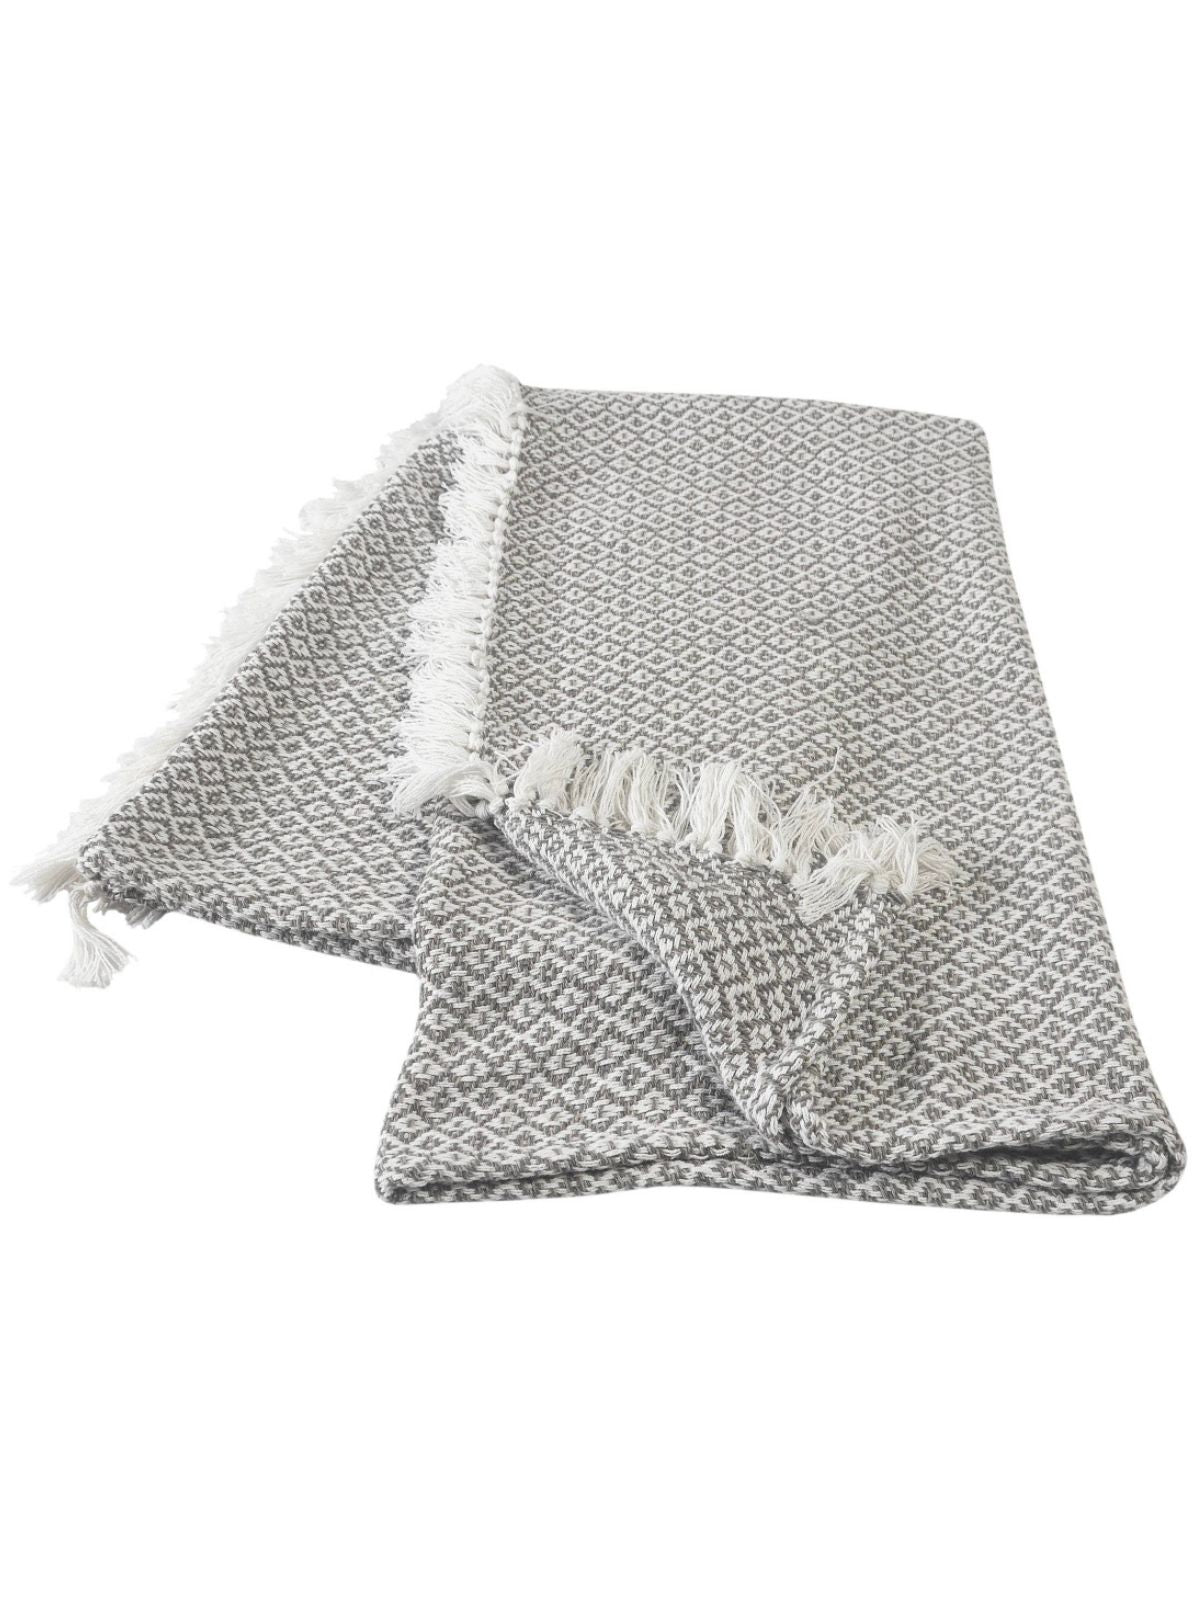 Gray and Ivory Diamond 100% Cotton Lightweight Decorative Throw Blanket with Fringe, 50W x 60L. 